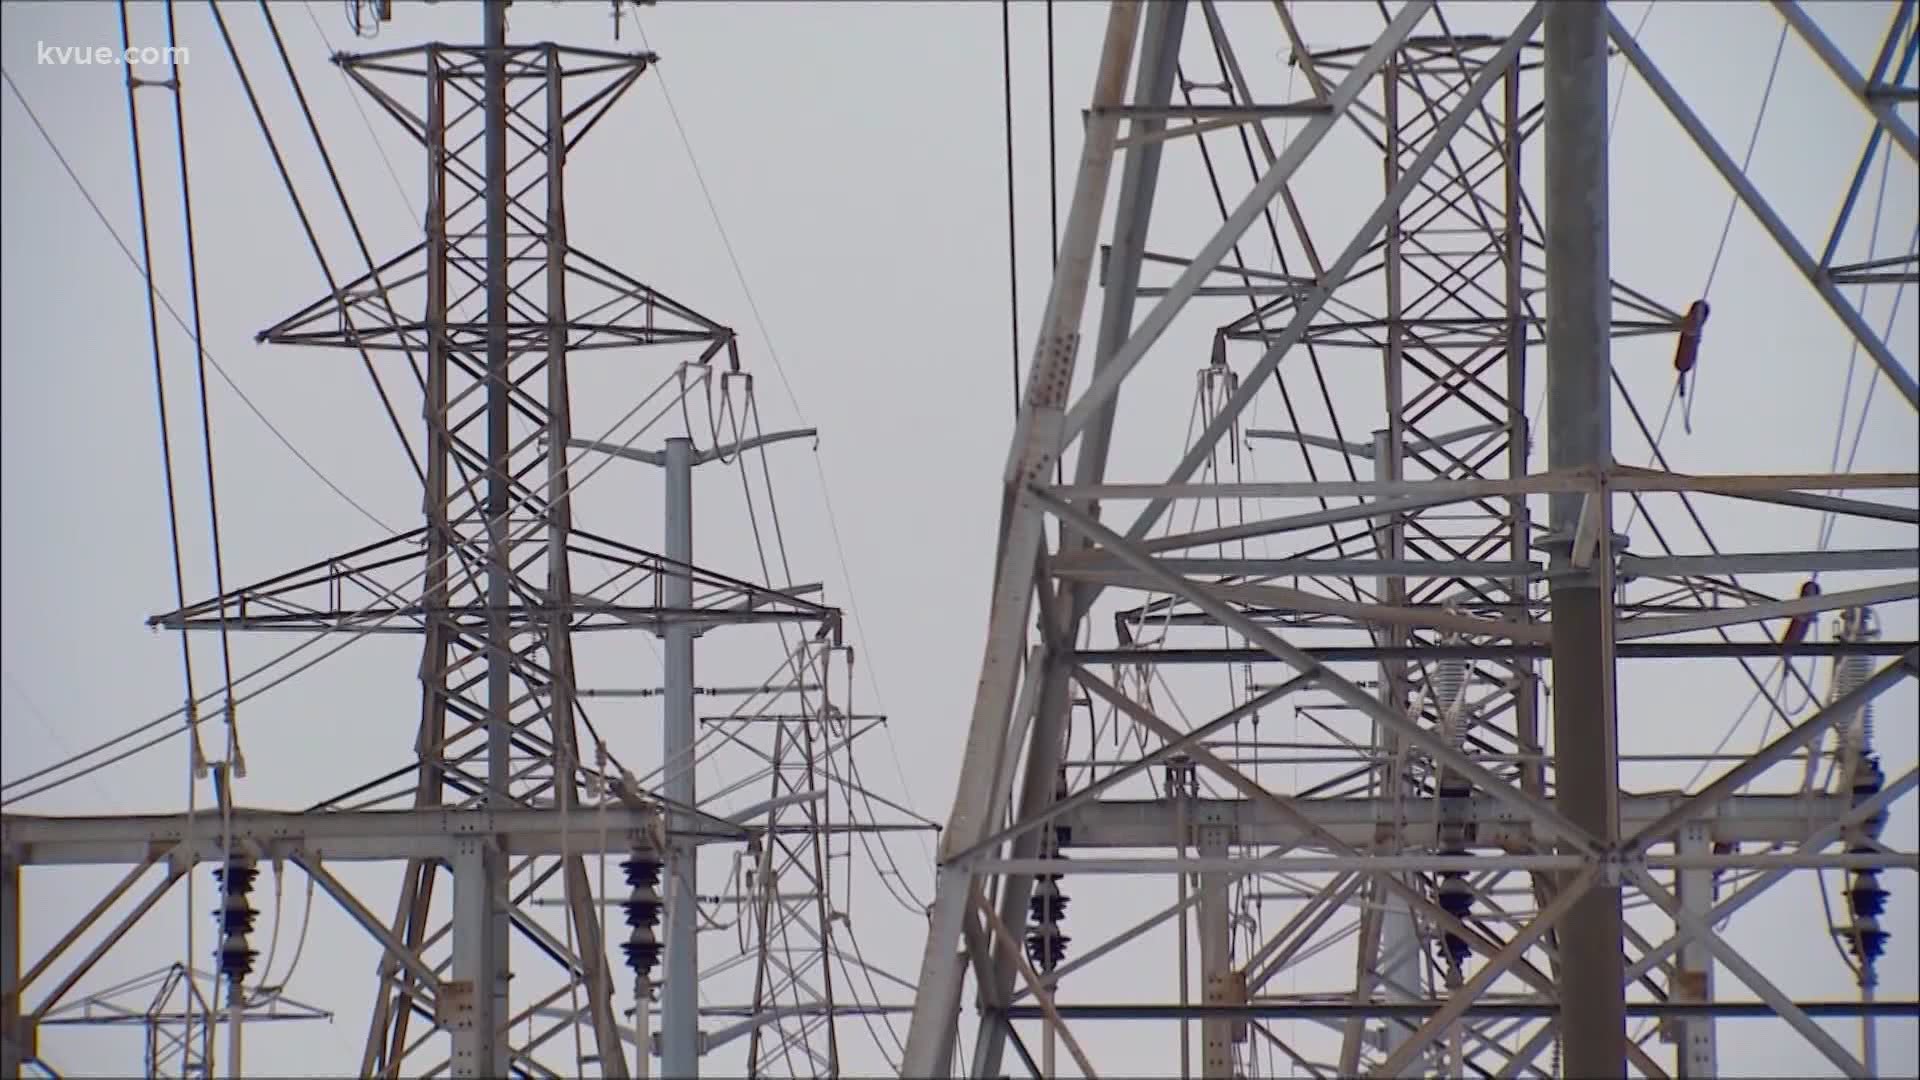 The State of Texas is suing the electric company Griddy after customers were billed thousands of dollars after the winter storms.